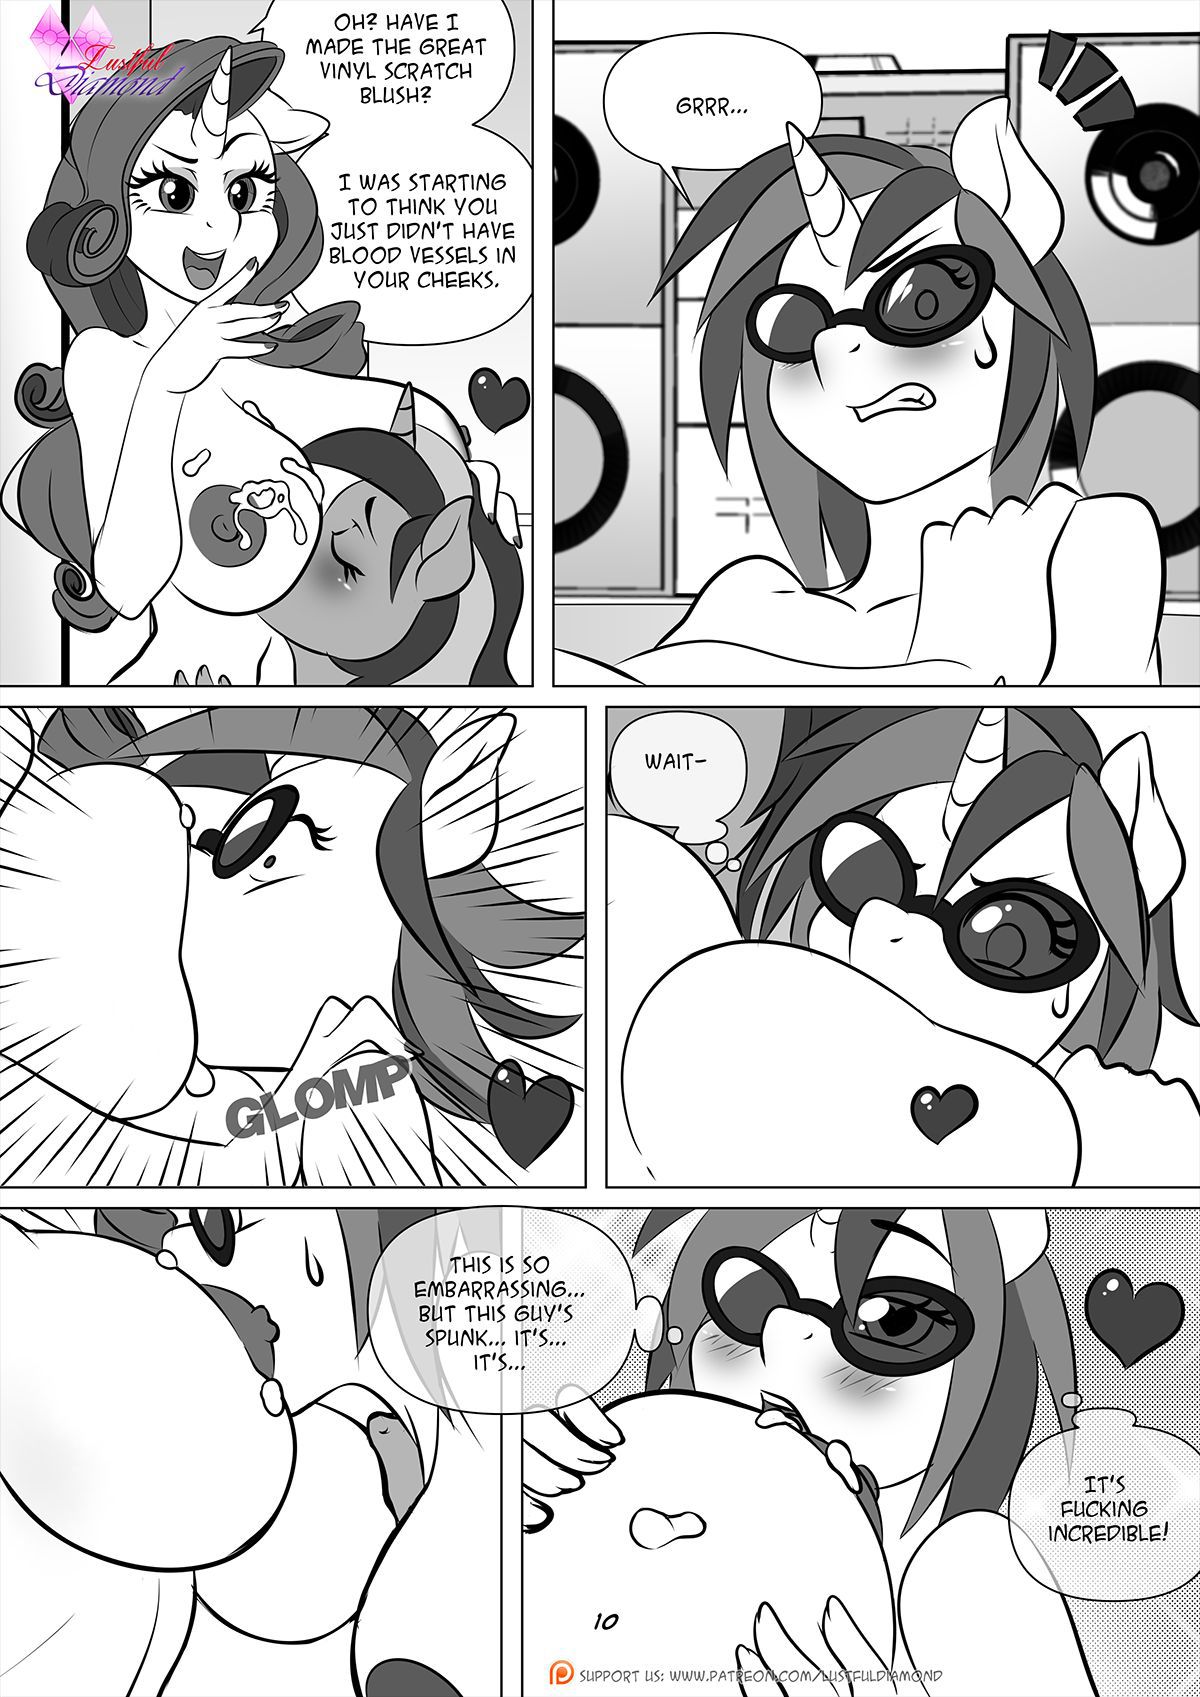 [Pia-Sama] Lustful Diamond - In the Pool (My Little Pony: Friendship is Magic) {Ongoing} 11